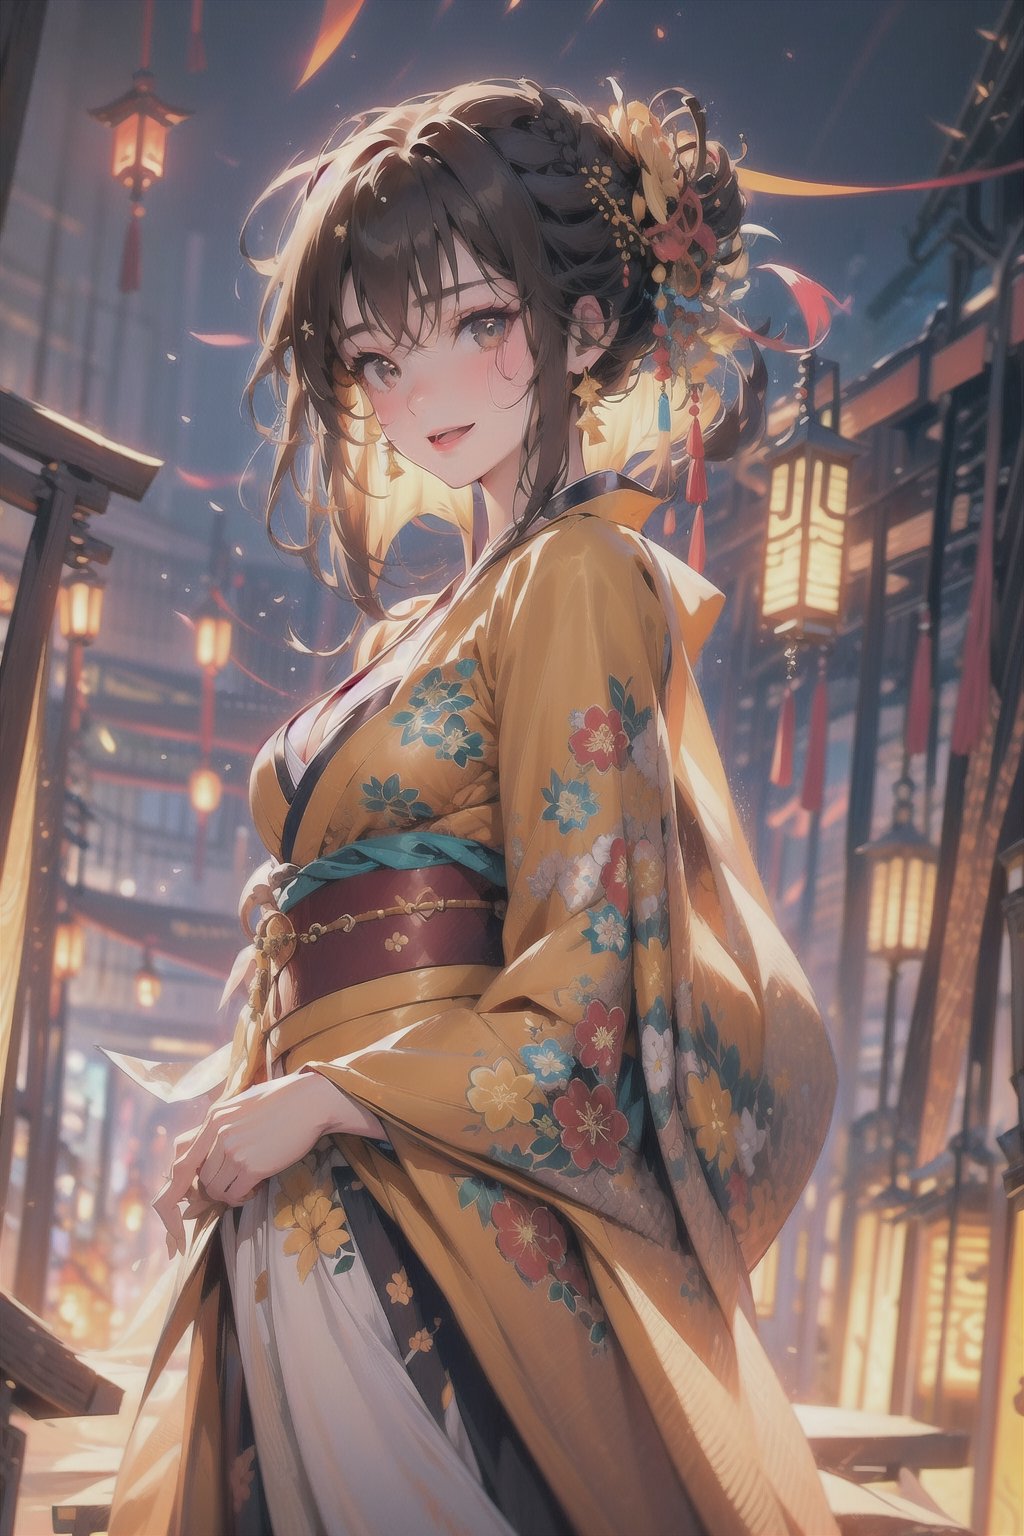 1 girl, colourful kimono, lantern pathway, torii, starry sky, from below, yellow obi, floral kimono, bright clothes, glowing lanterns, jewelery, modest cleavage, happy expression, brown hair, glowing flowers in hair, raindrops, glittering raindrops